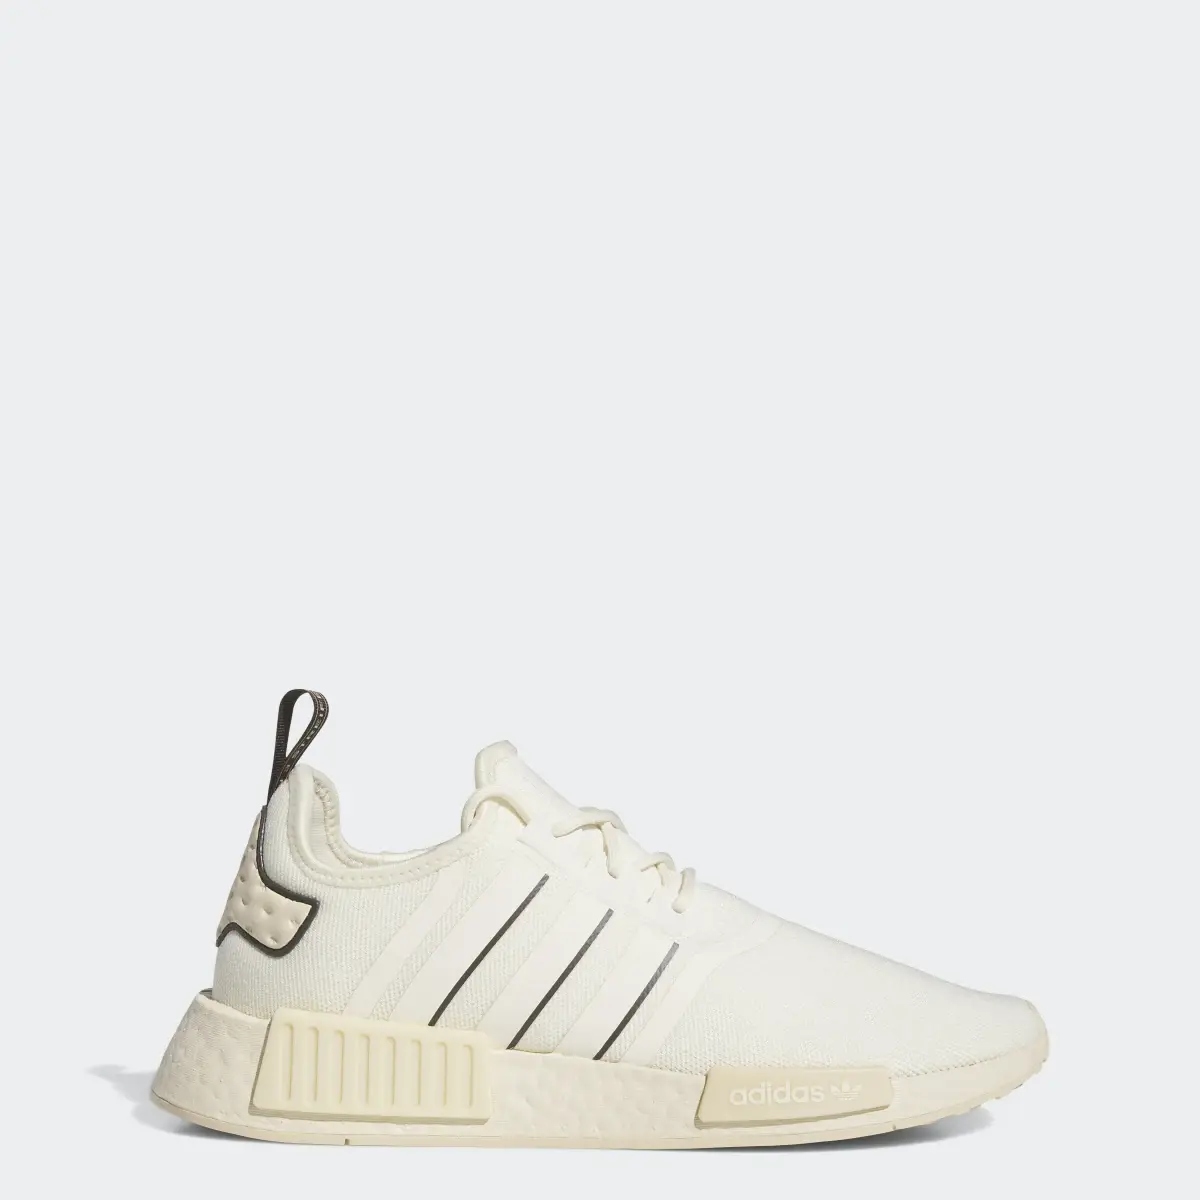 Adidas NMD_R1 Low Trainers. 1